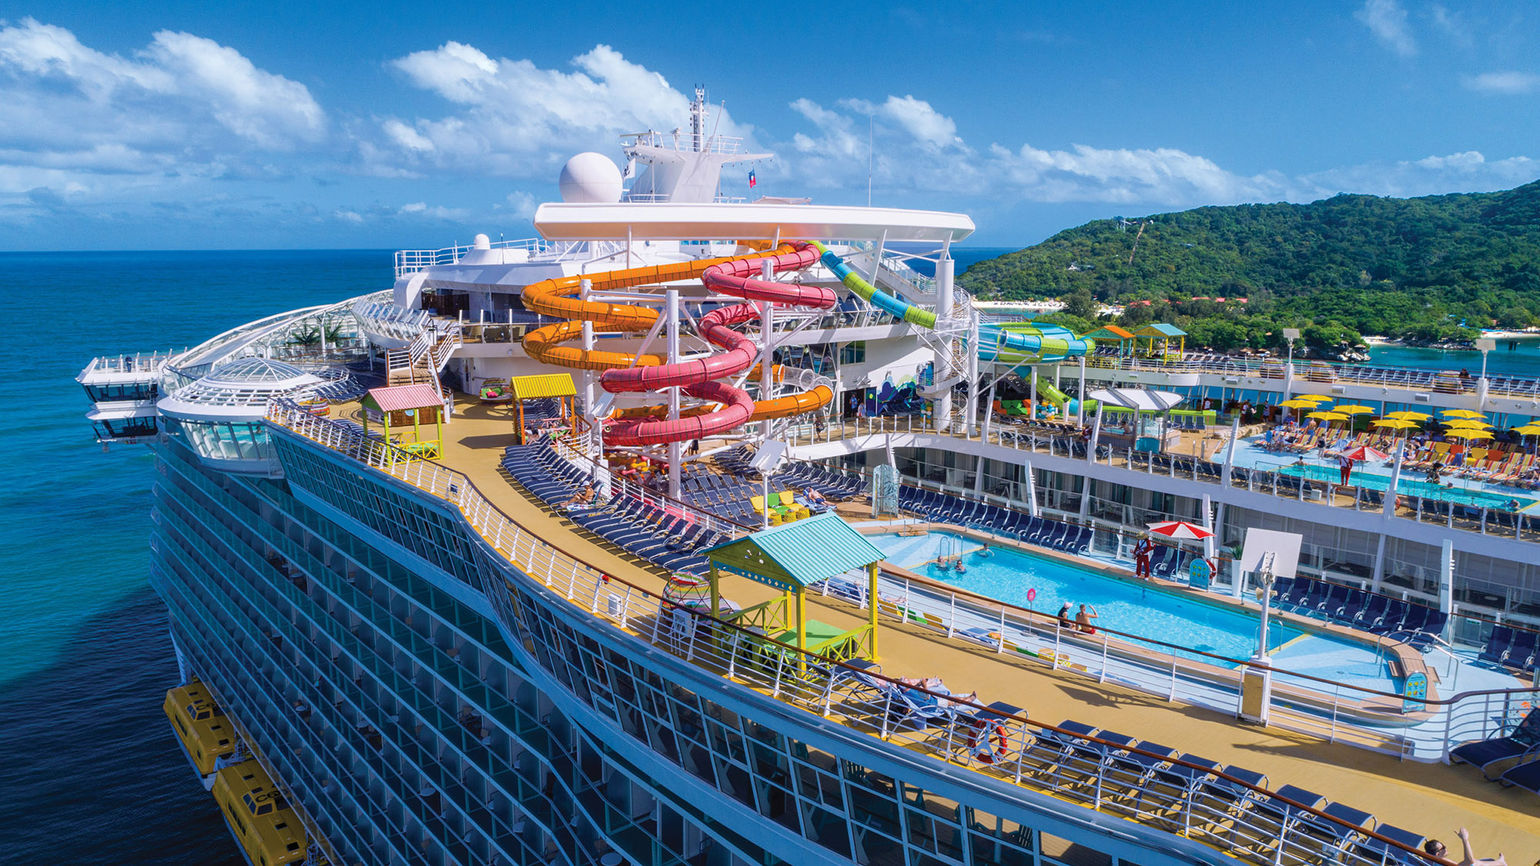 Cruise industry feels singled out by CDC's Covid warning